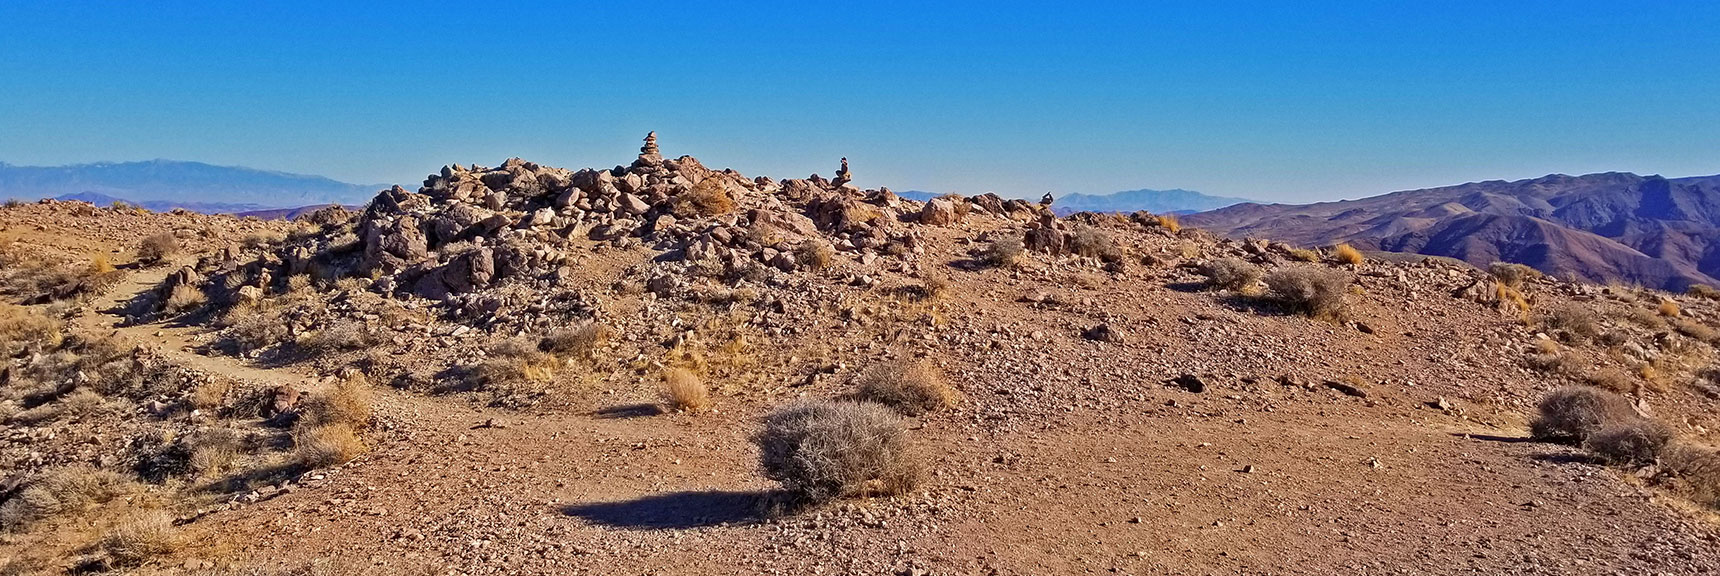 Cairns on a High Point on Dante's Ridge | Dante's View to Mt. Perry | Death Valley National Park, CA